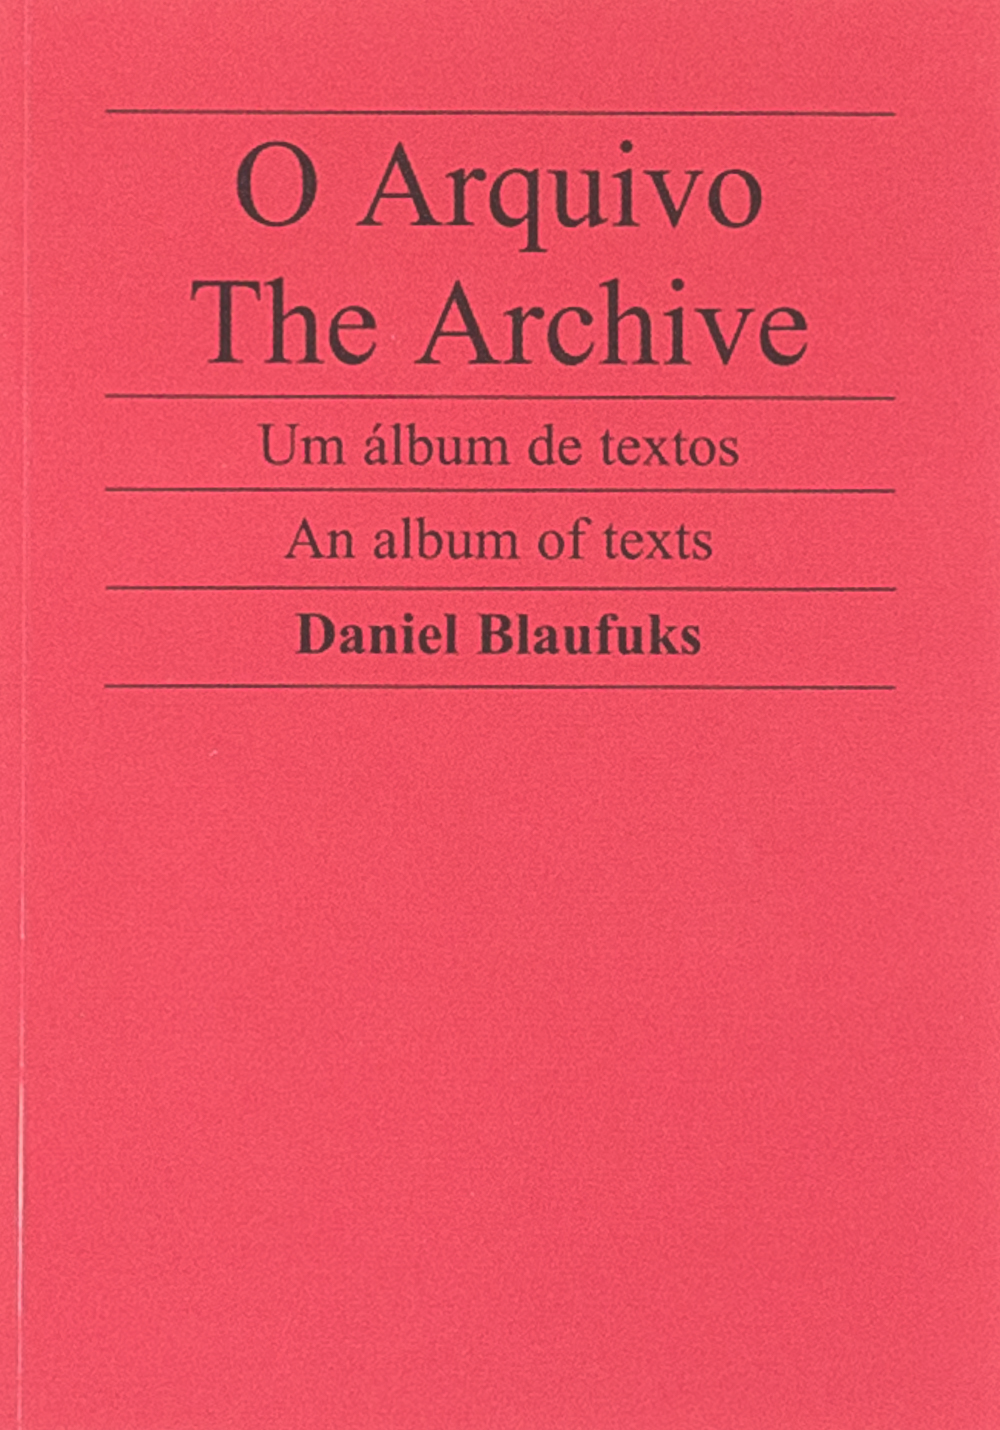 The Archive, an Album of Texts